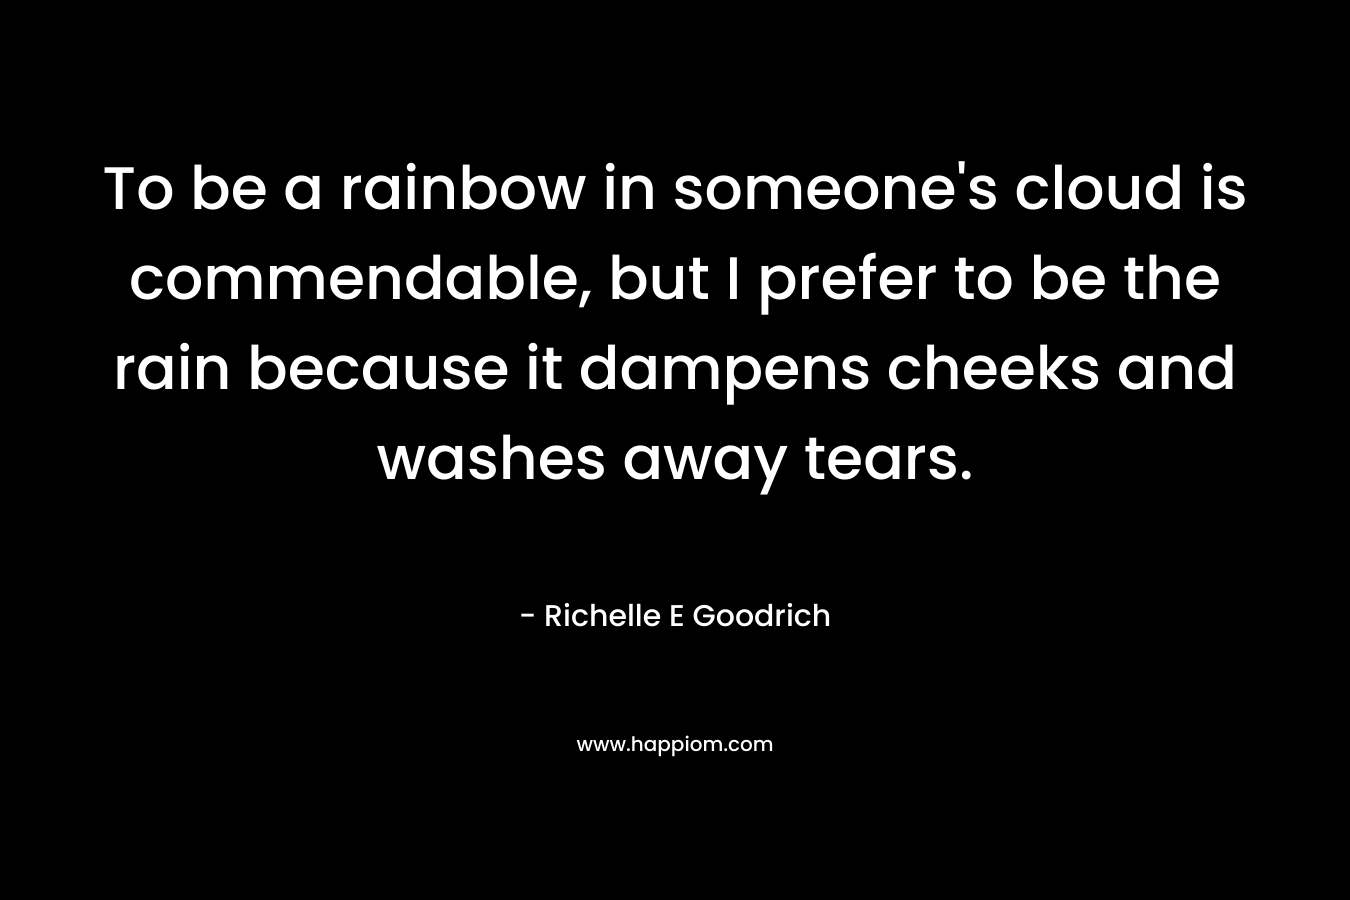 To be a rainbow in someone’s cloud is commendable, but I prefer to be the rain because it dampens cheeks and washes away tears. – Richelle E Goodrich